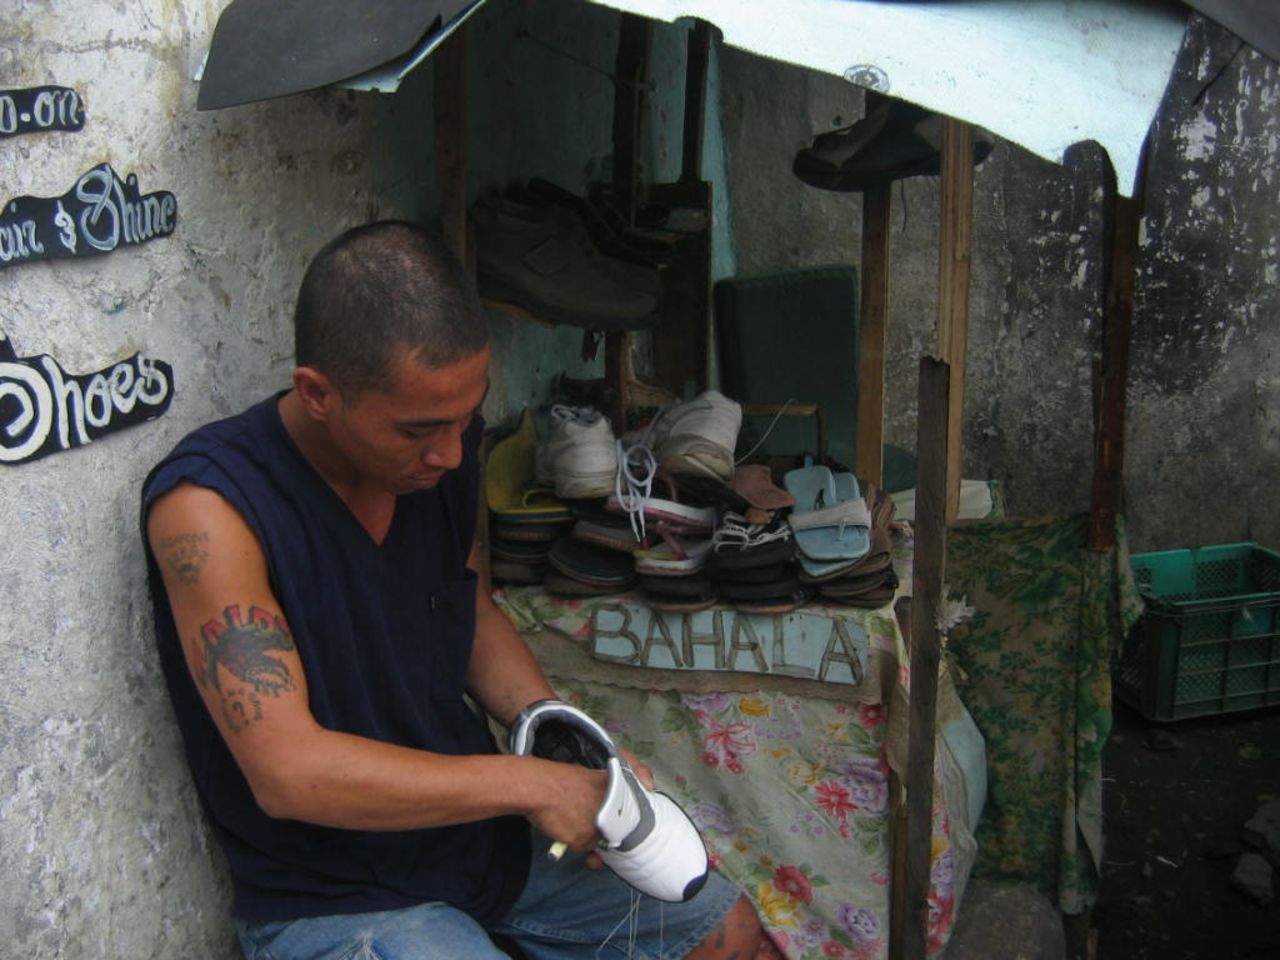 An inmate opens up his own business repairing shoes inside the prison. Narag says most inmates use their skills to earn extra money which they usually send back to help support their families.